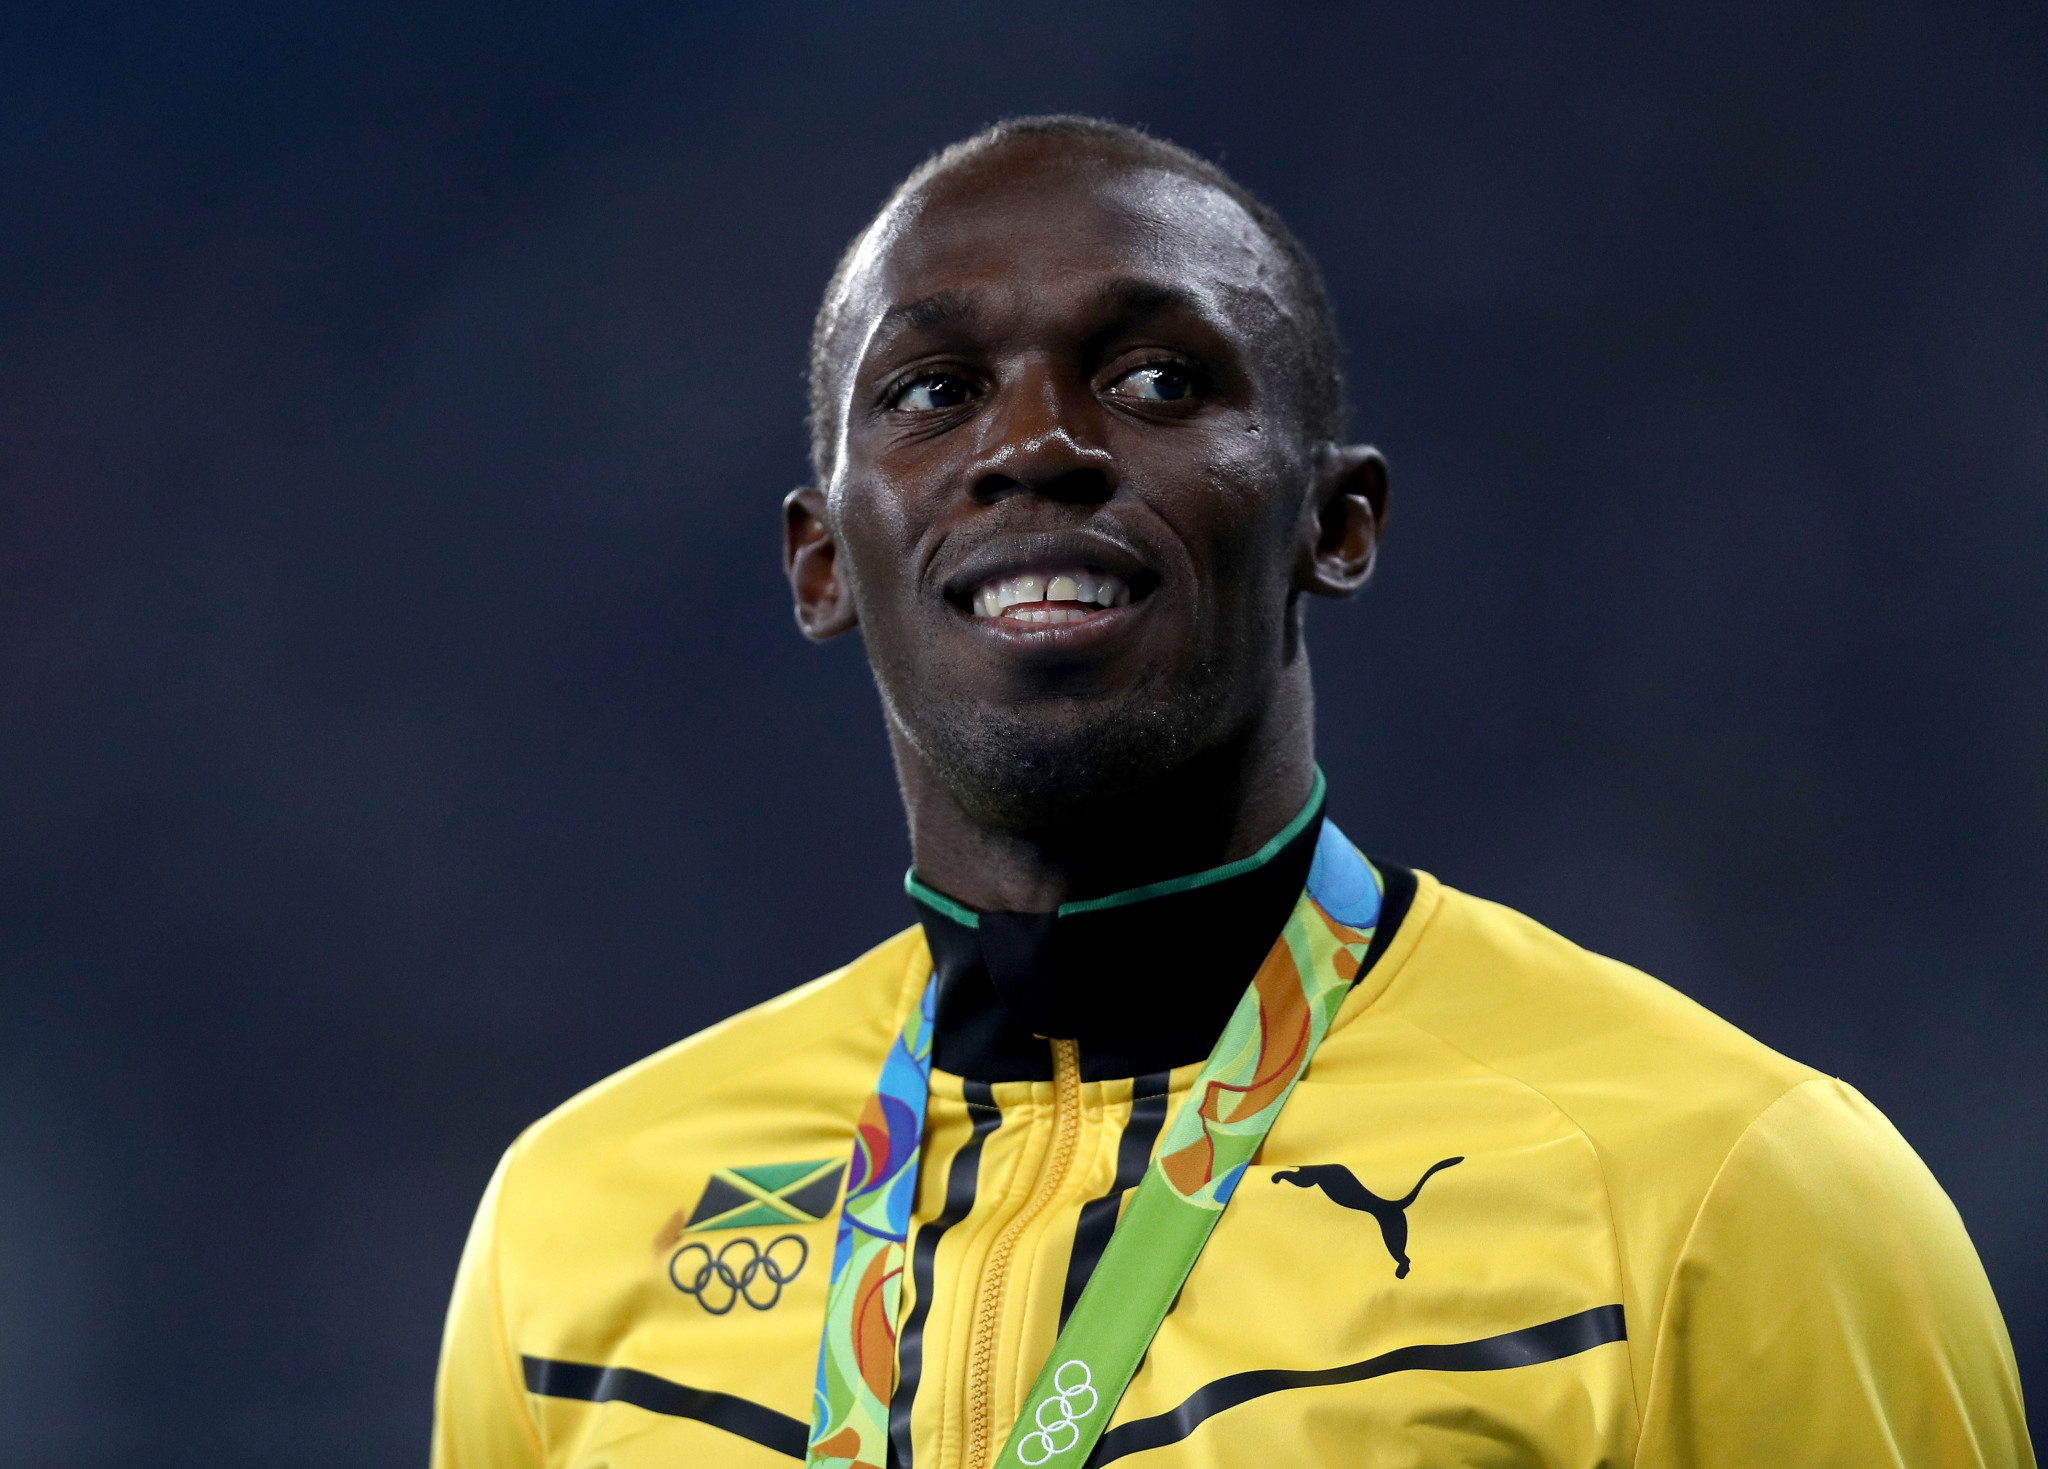 Usain Bolt is one of the faces of the It's a Penalty campaign ©Getty Images